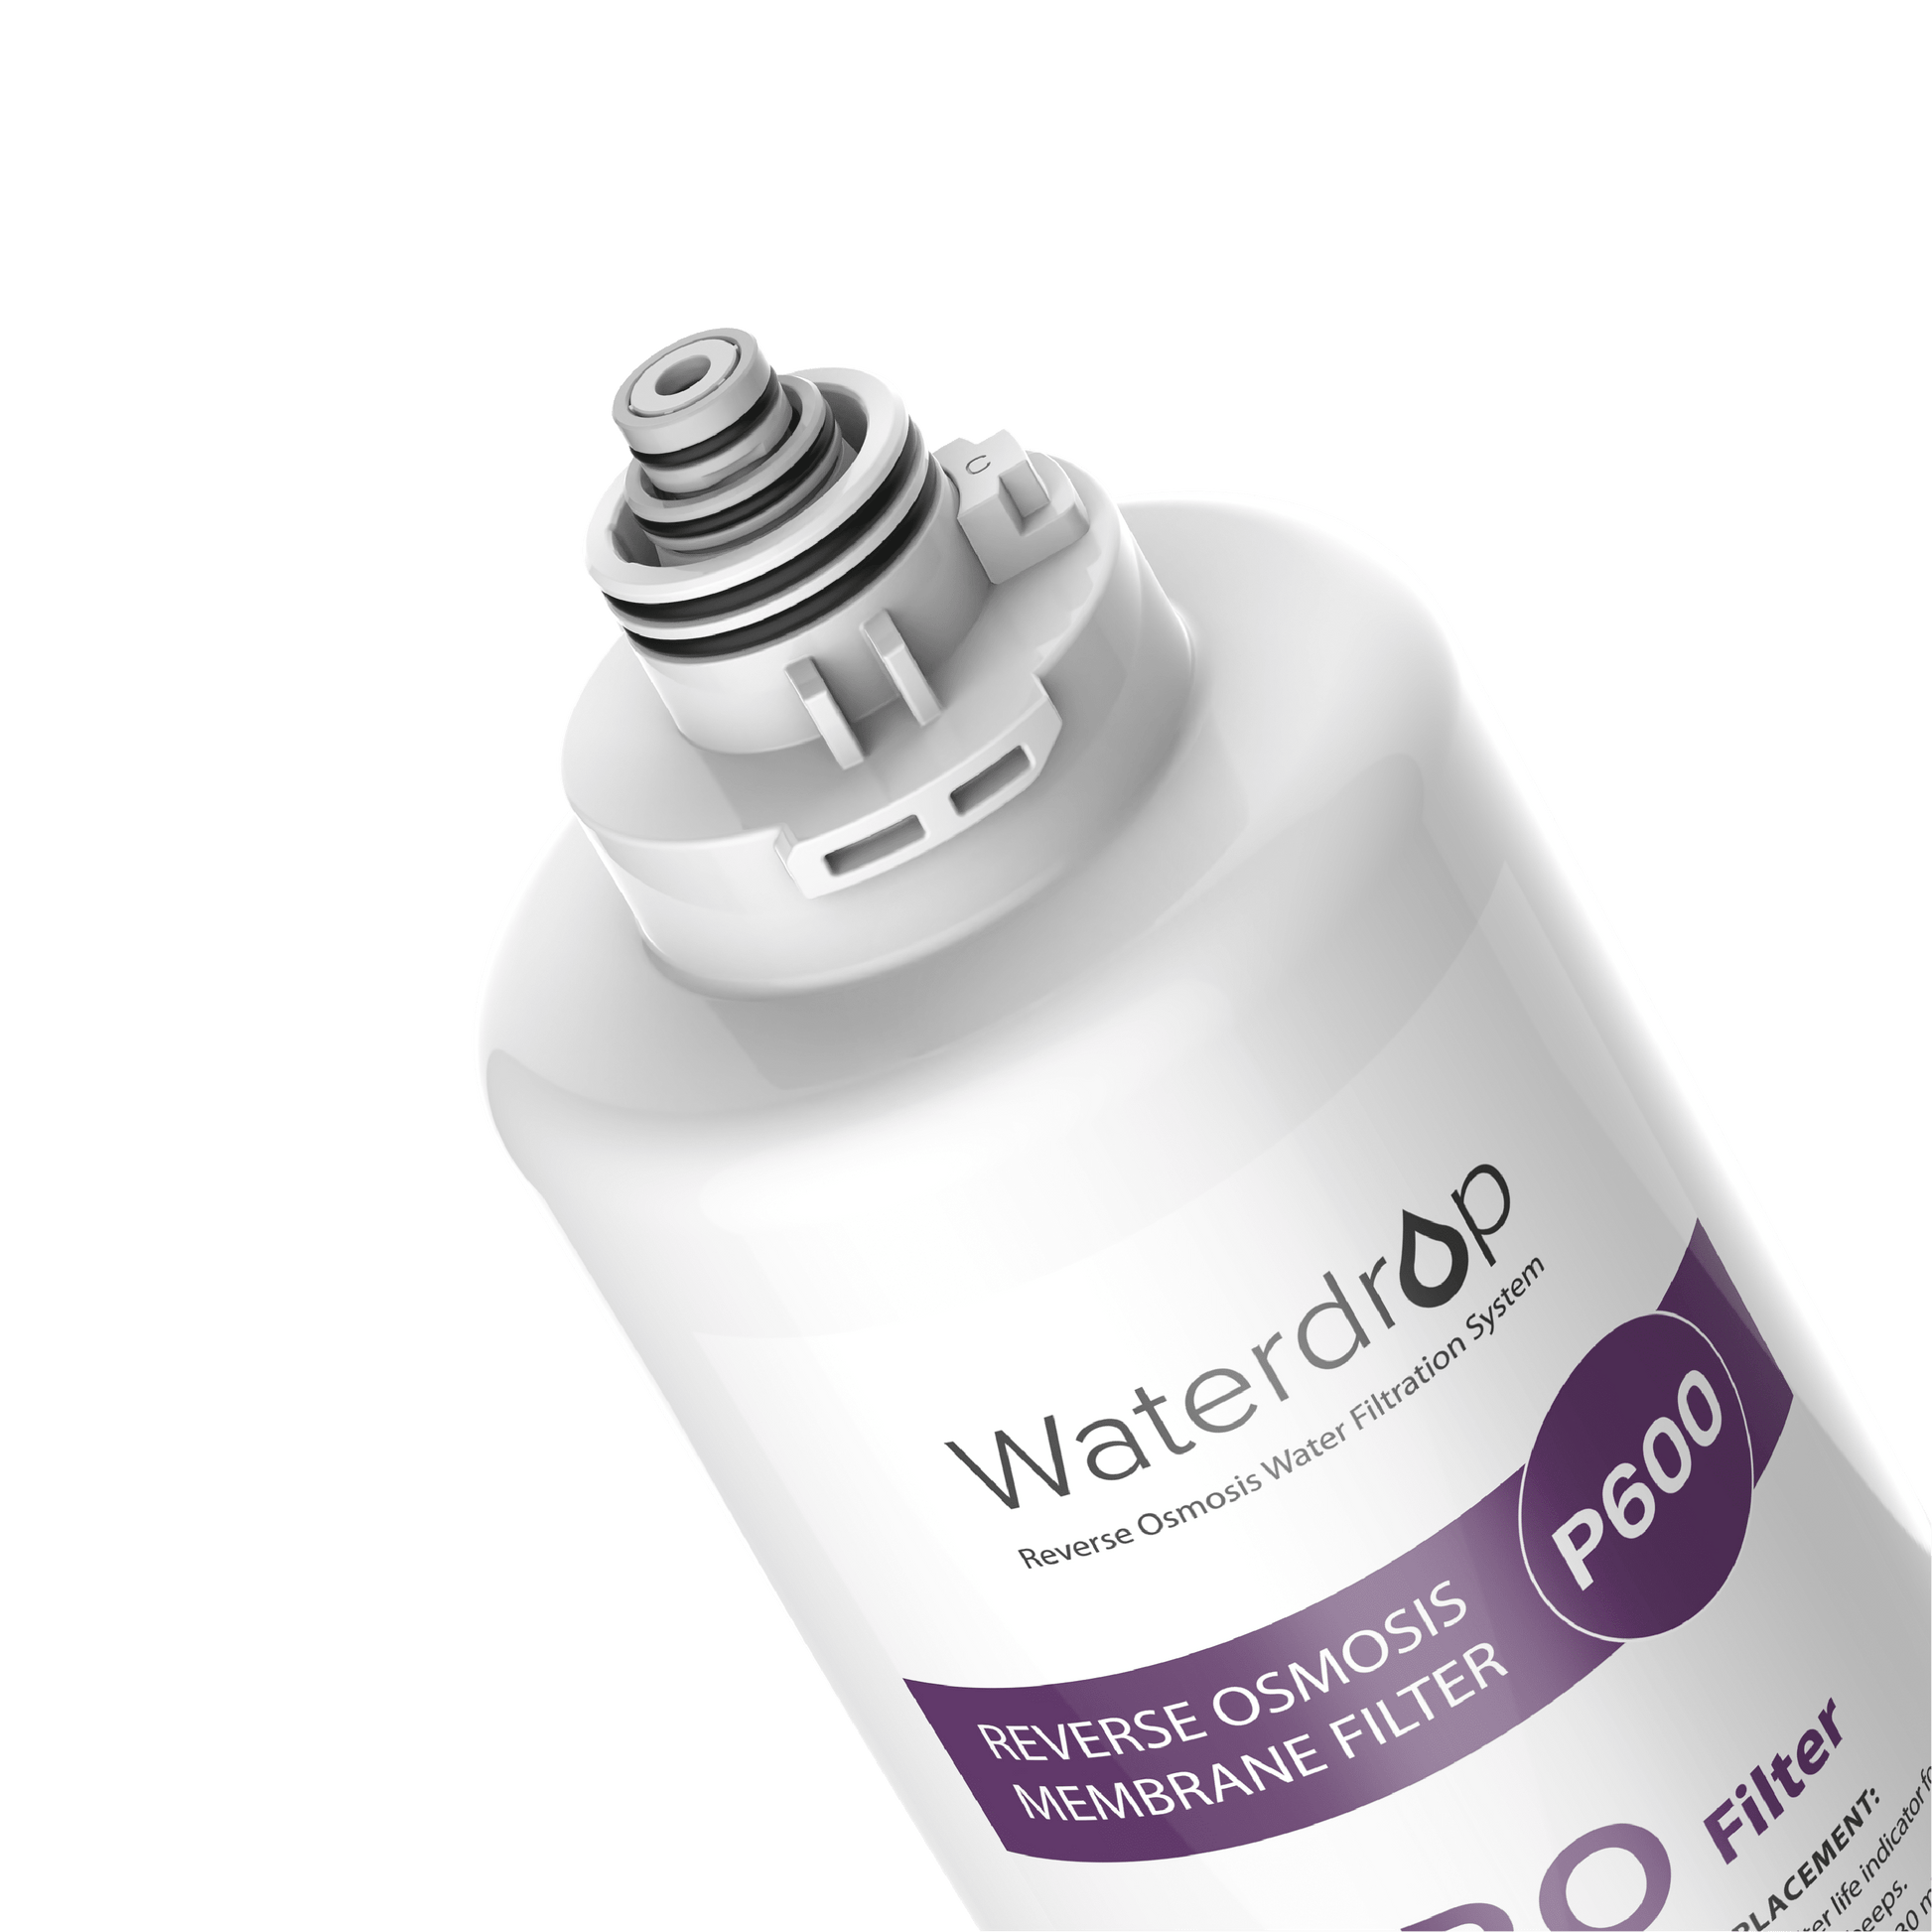 WD-G3P600-RO Filter for Waterdrop G3P600 Reverse Osmosis System | 600GPD - Waterdrop Germany